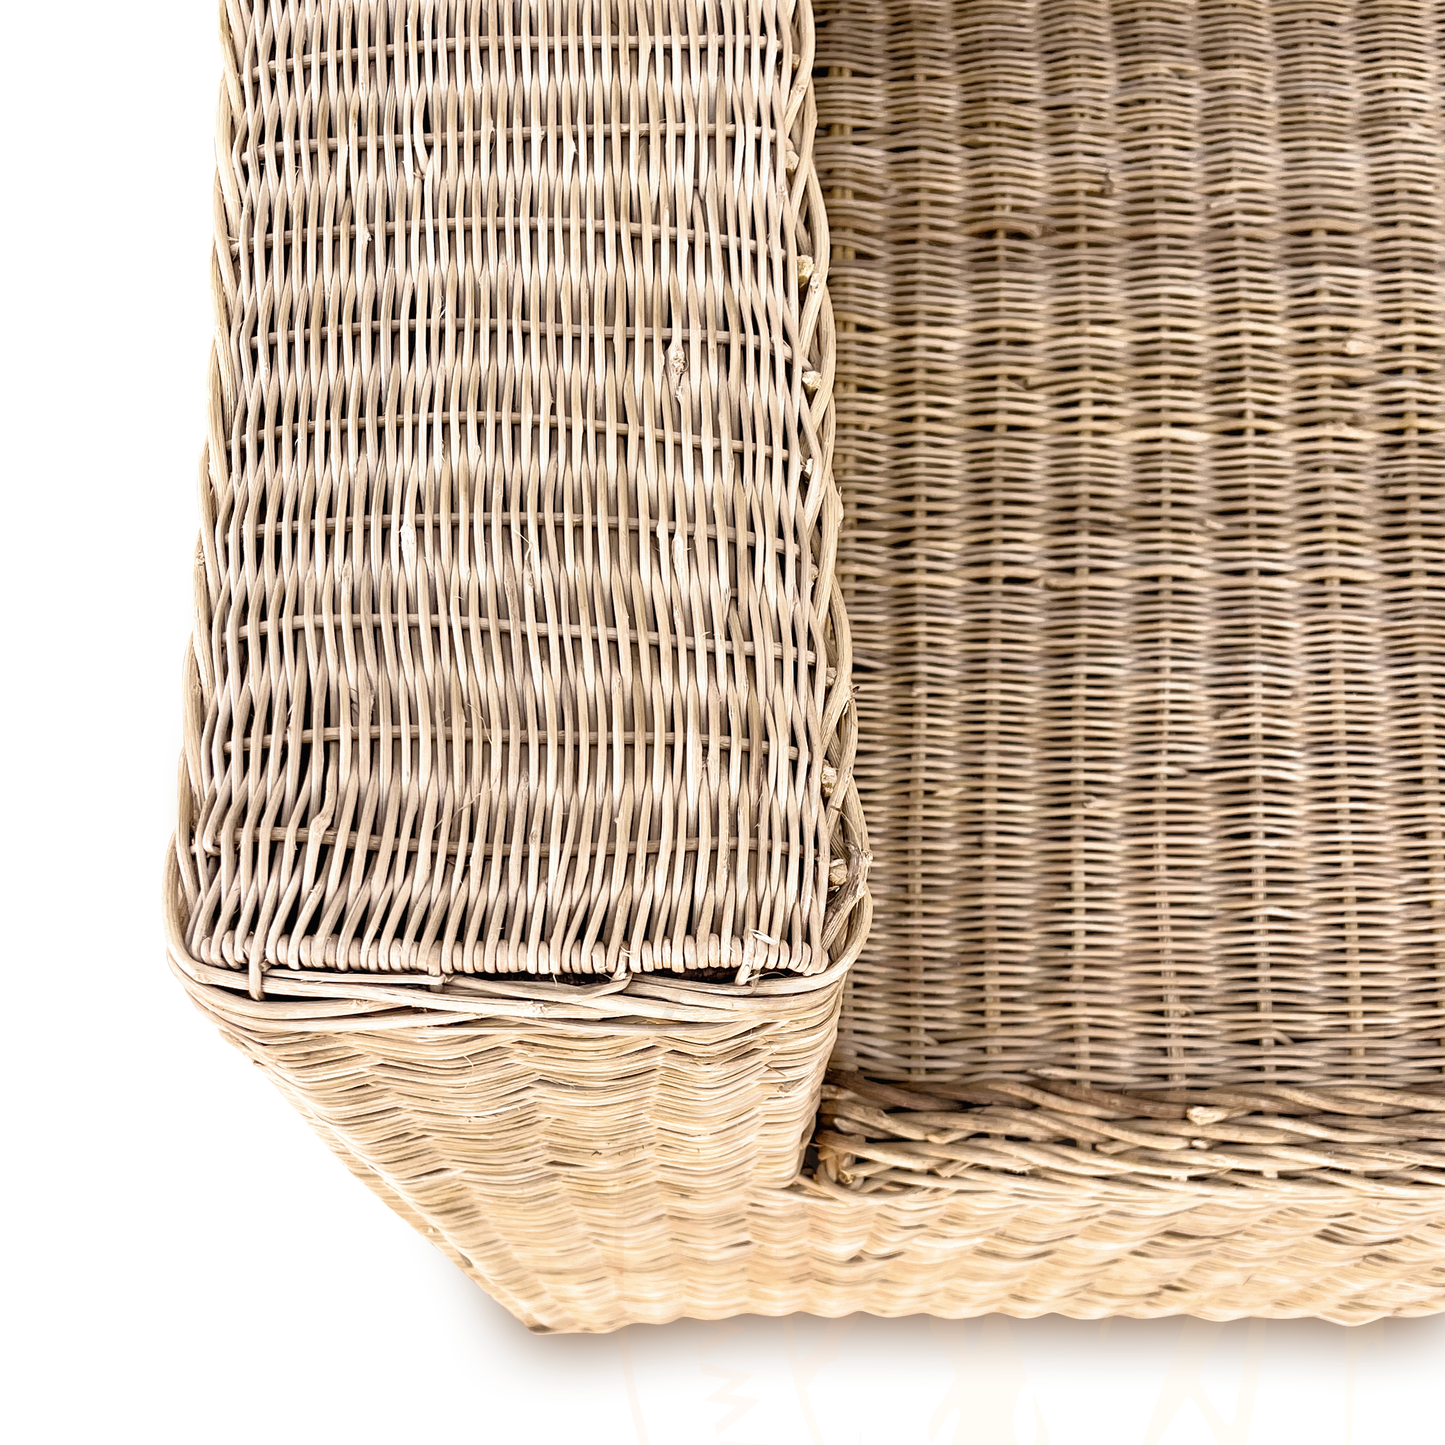 BOX Malawi Couch – One Seater hand weaved woven rattan cane chair malawi patio outdoor